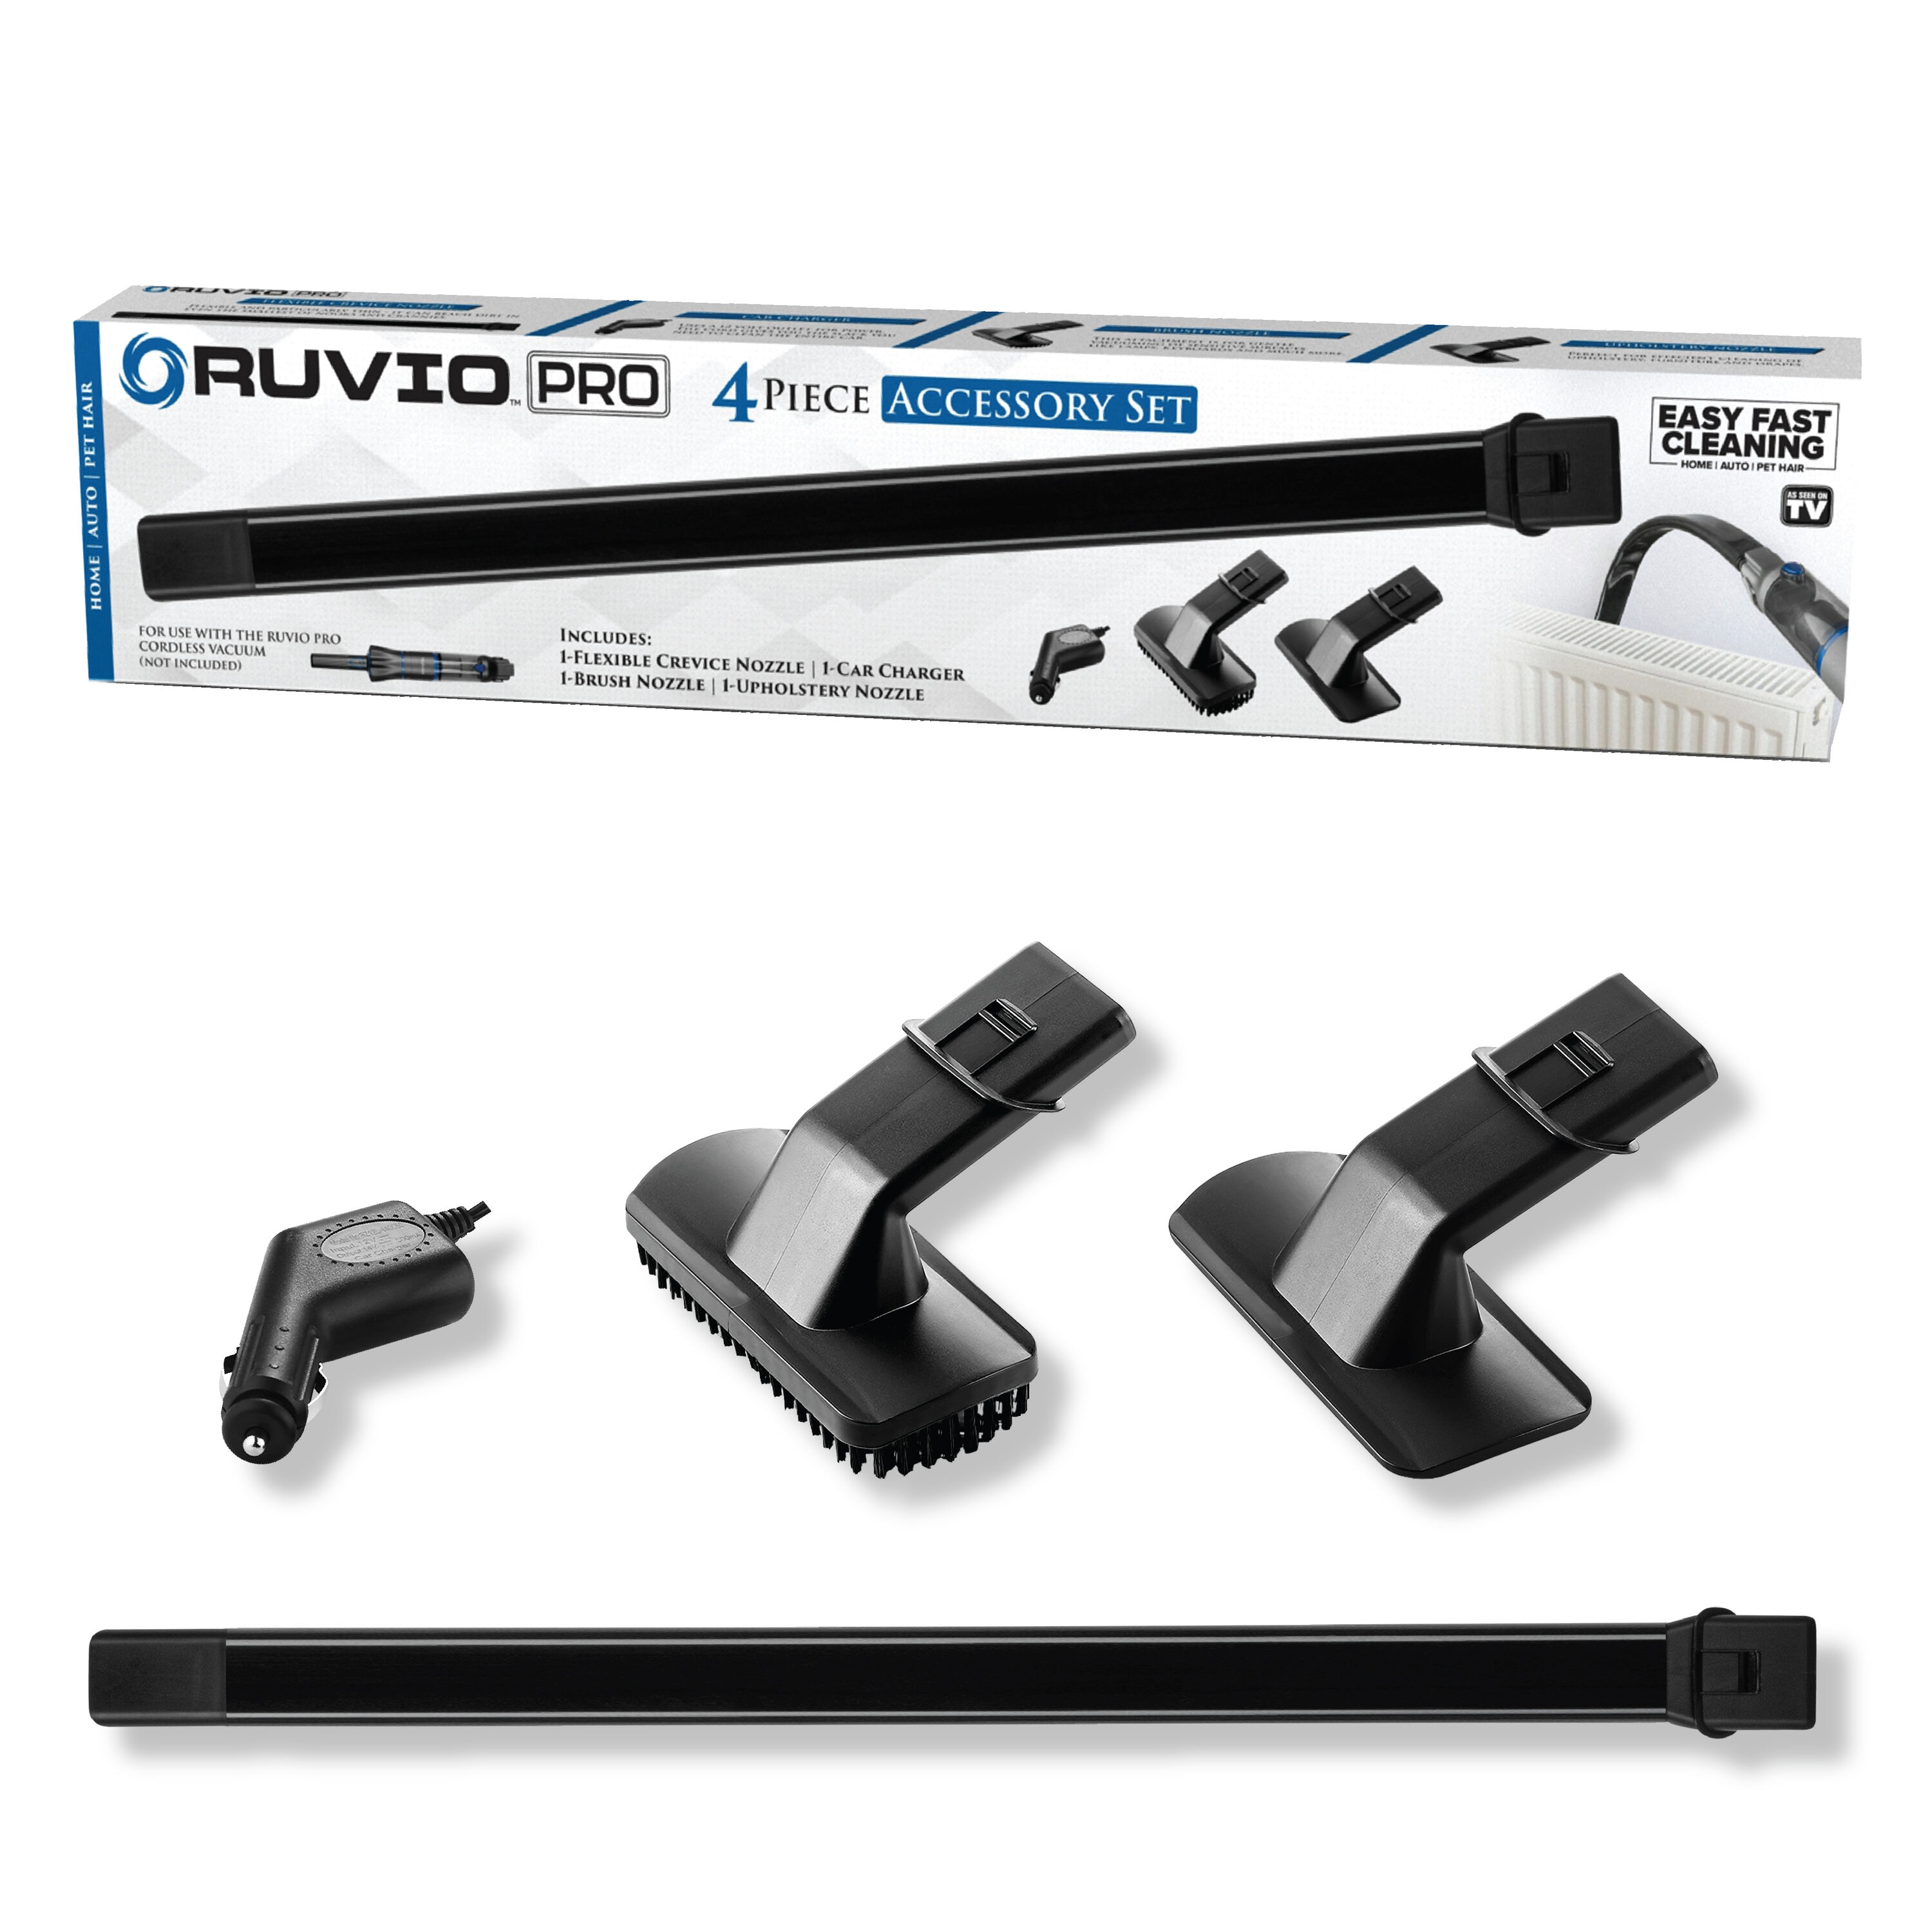 Crevice Nozzle with Attachable Wire Radiator Brush